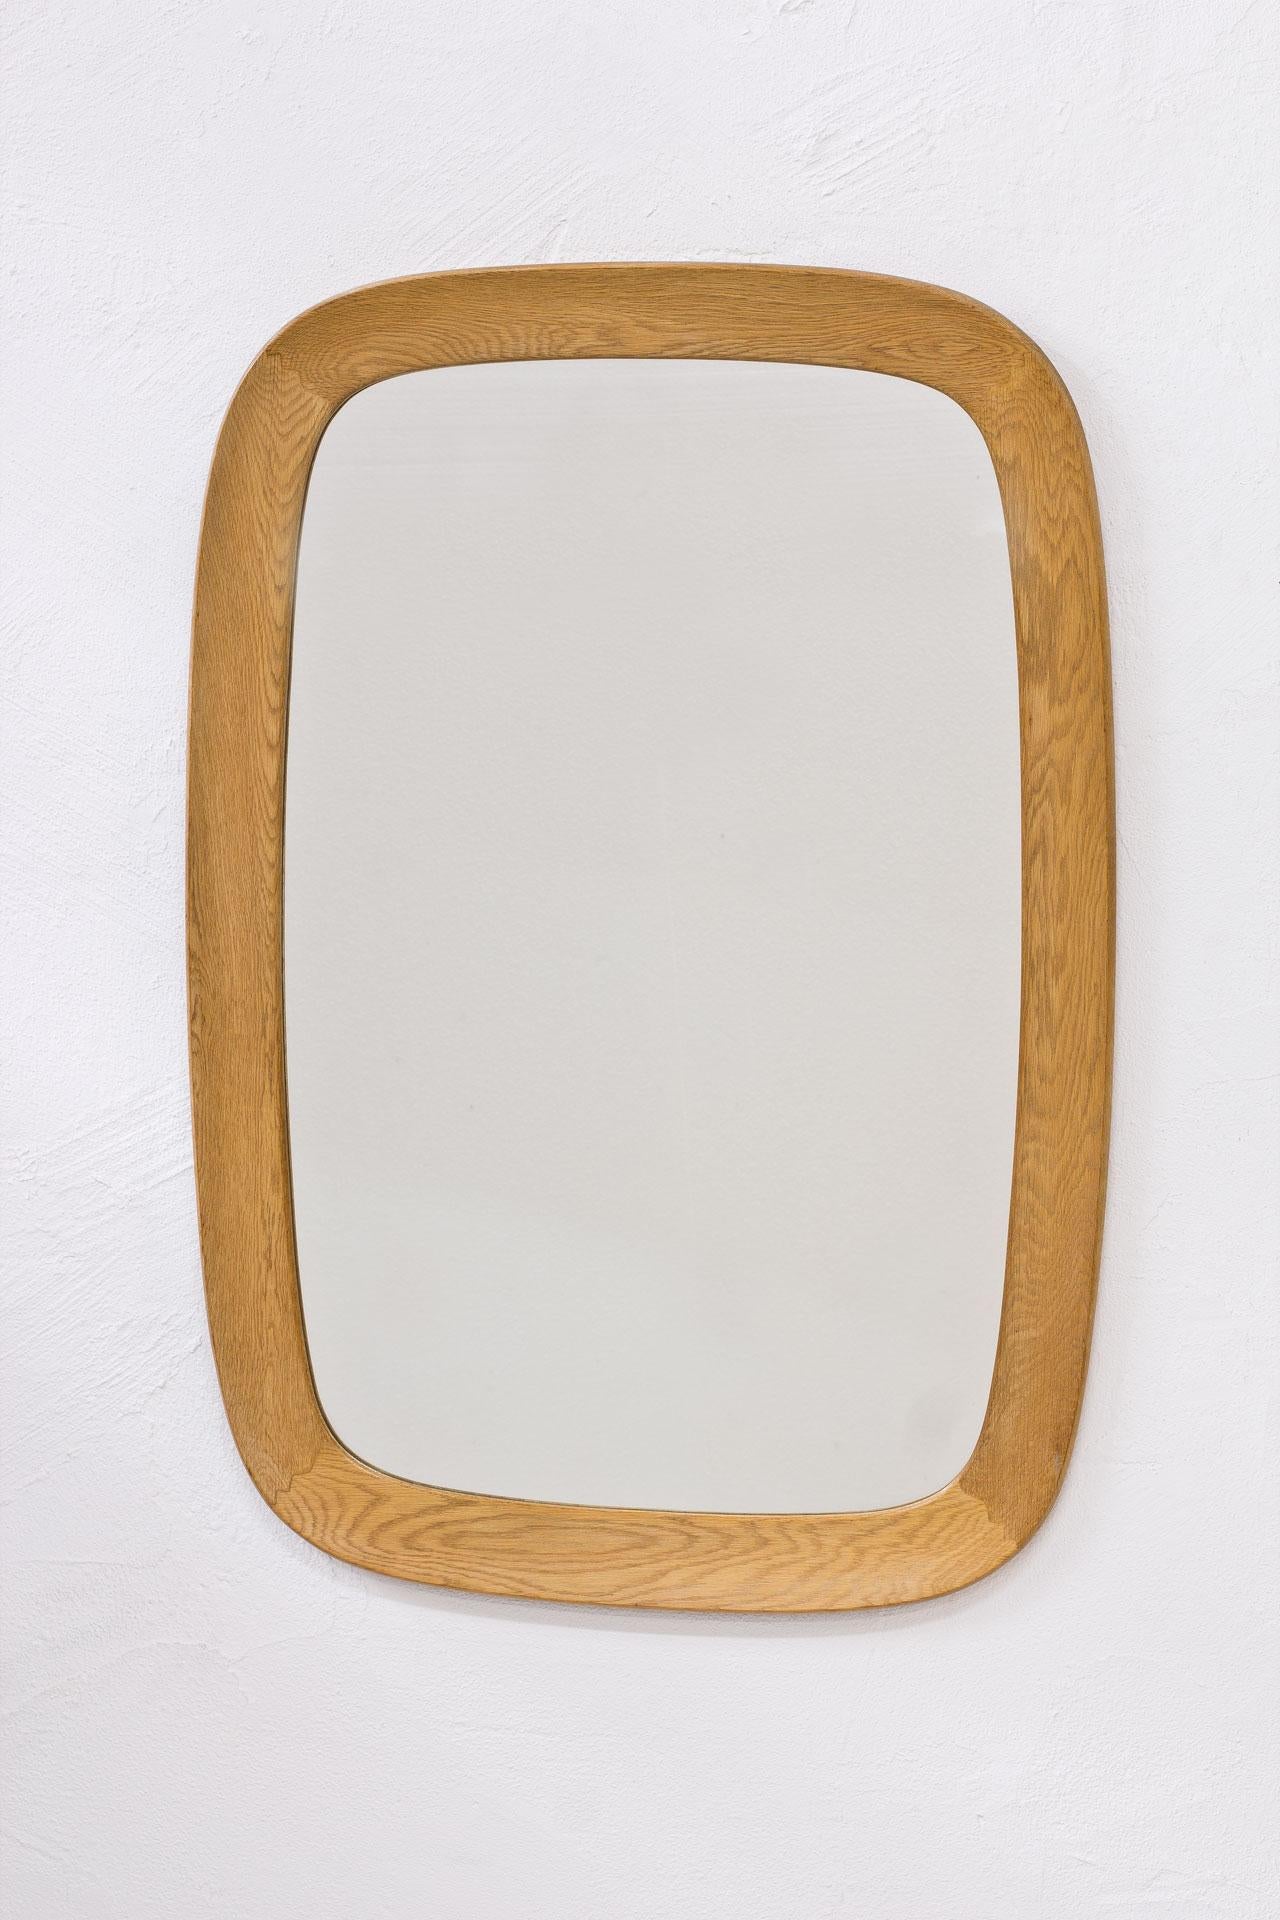 Oval shaped oak wall mirror designed by Per Argén for Fröseke AB Nybrofabriken in
Sweden during the 1950s. Good vintage condition with patina and minor age related
signs on the glass.